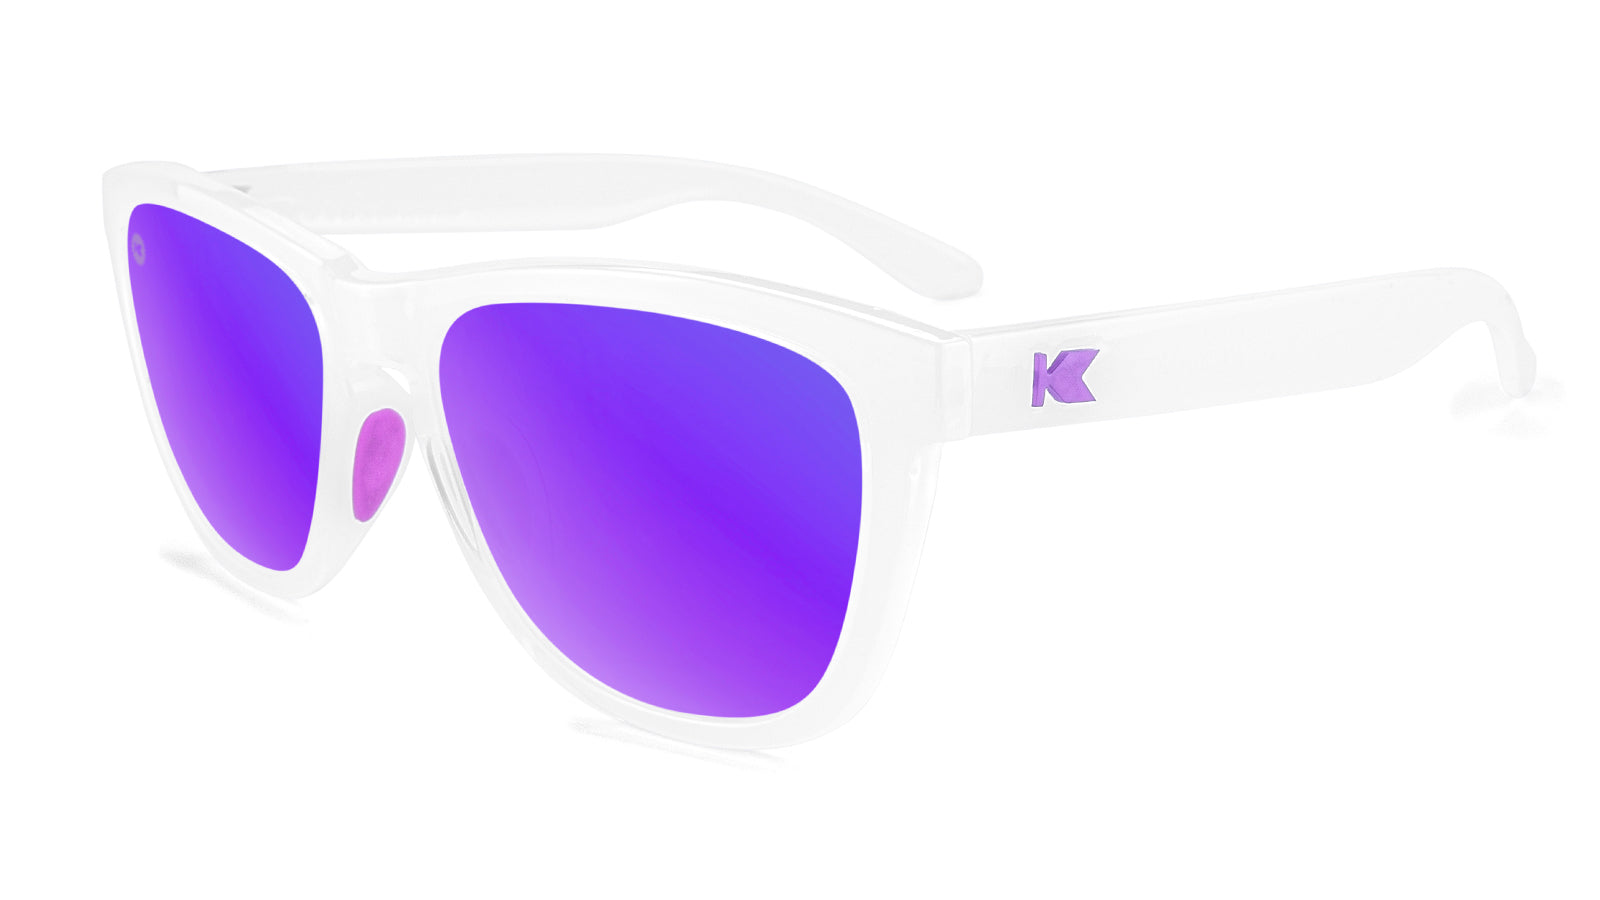 Sport Sunglasses with Clear Jelly Frame and Polarized Purple Lenses, Flyover